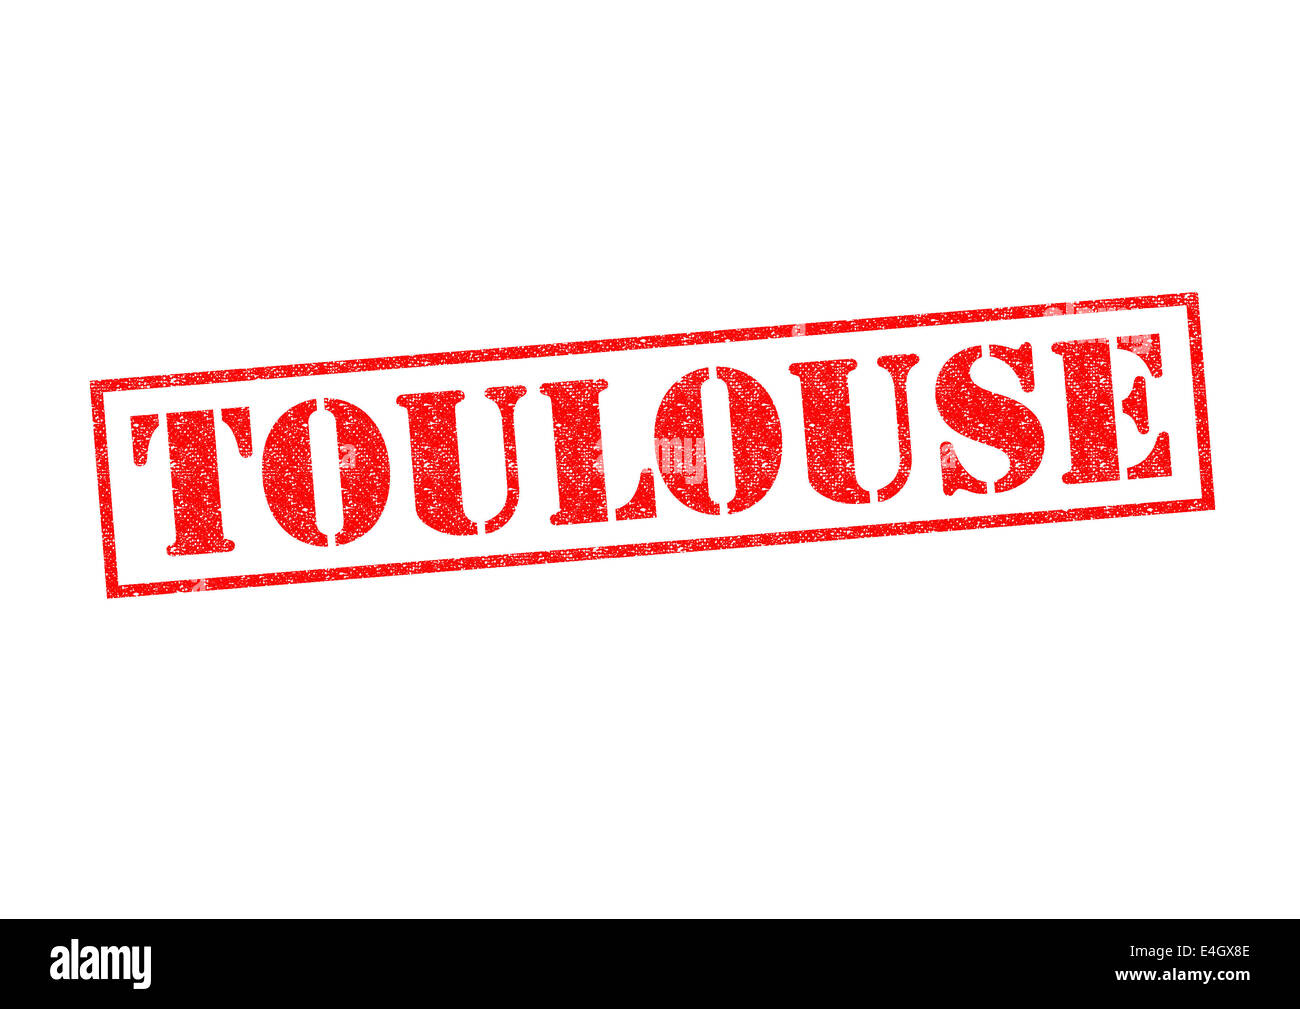 TOULOUSE Rubber Stamp over a white background. Stock Photo